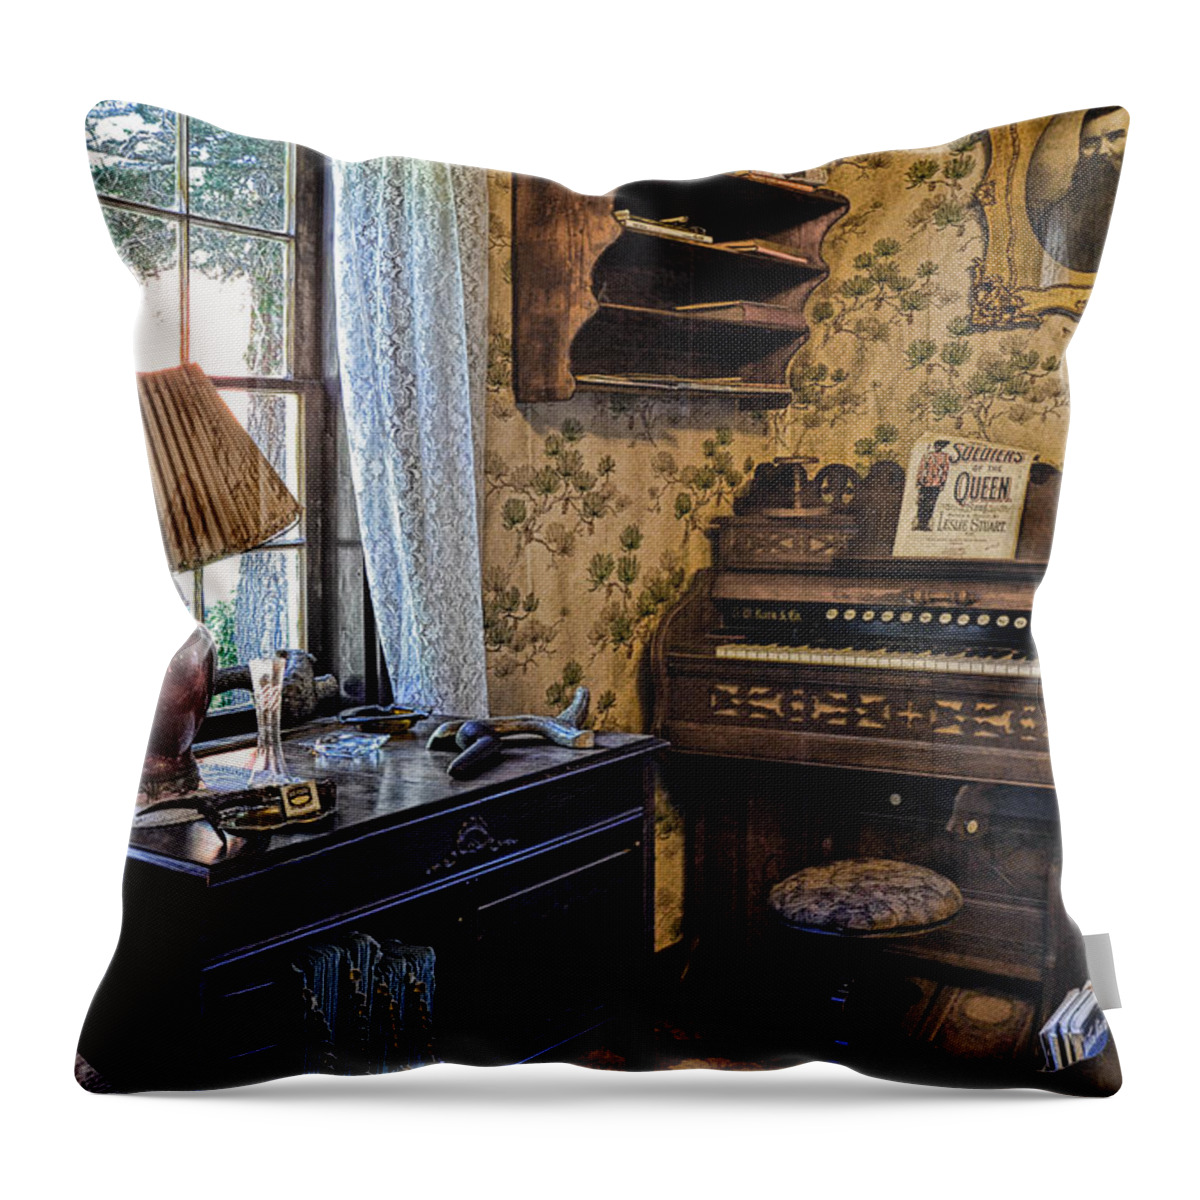 Karn Throw Pillow featuring the photograph D. W. Karn Co. by Ed Hall